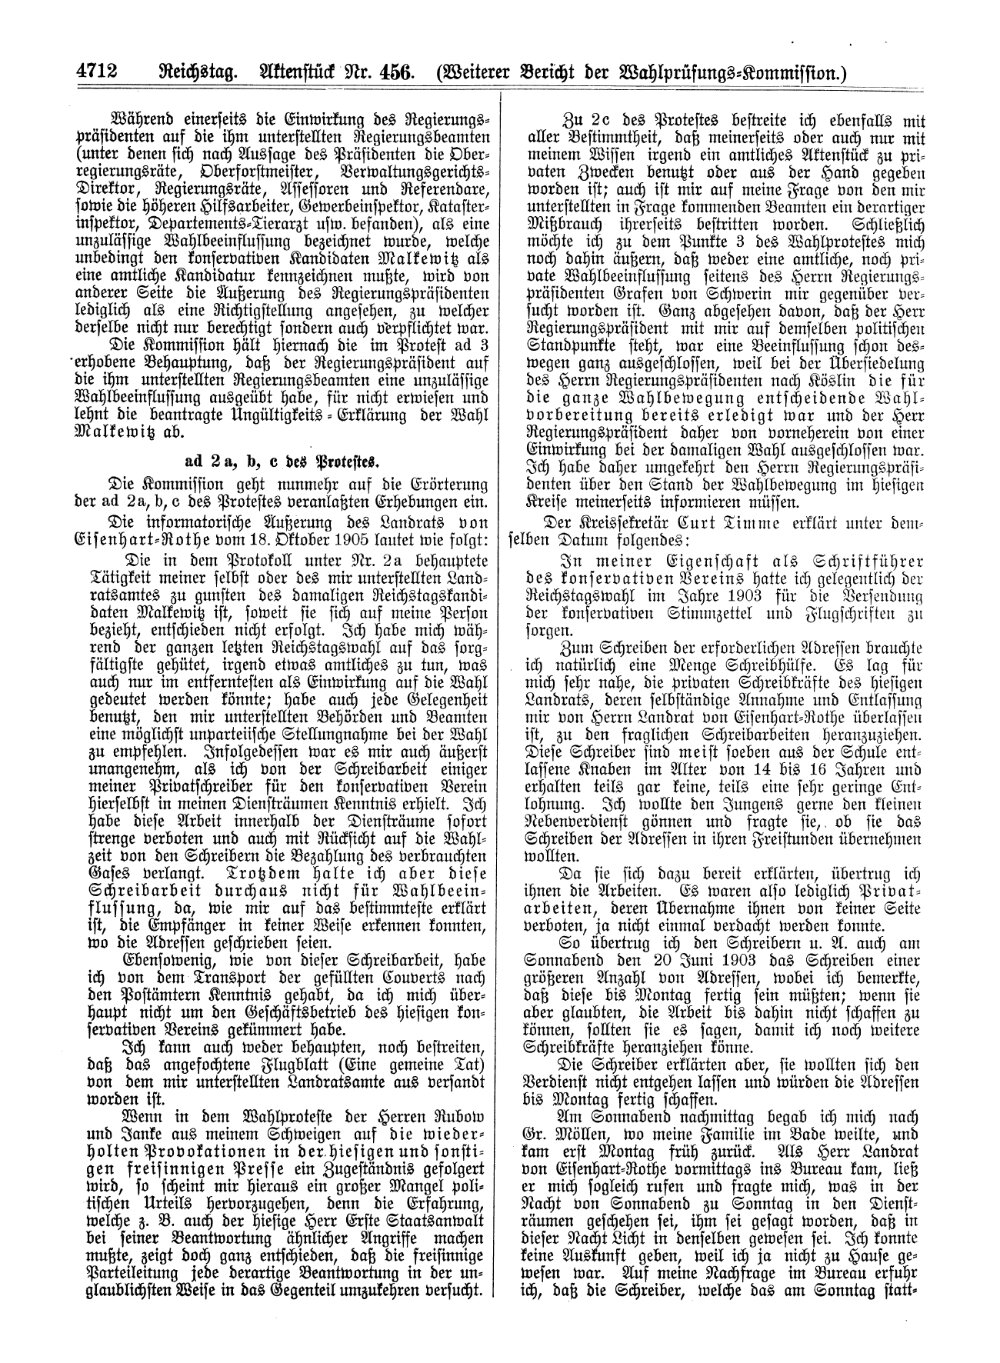 Scan of page 4712